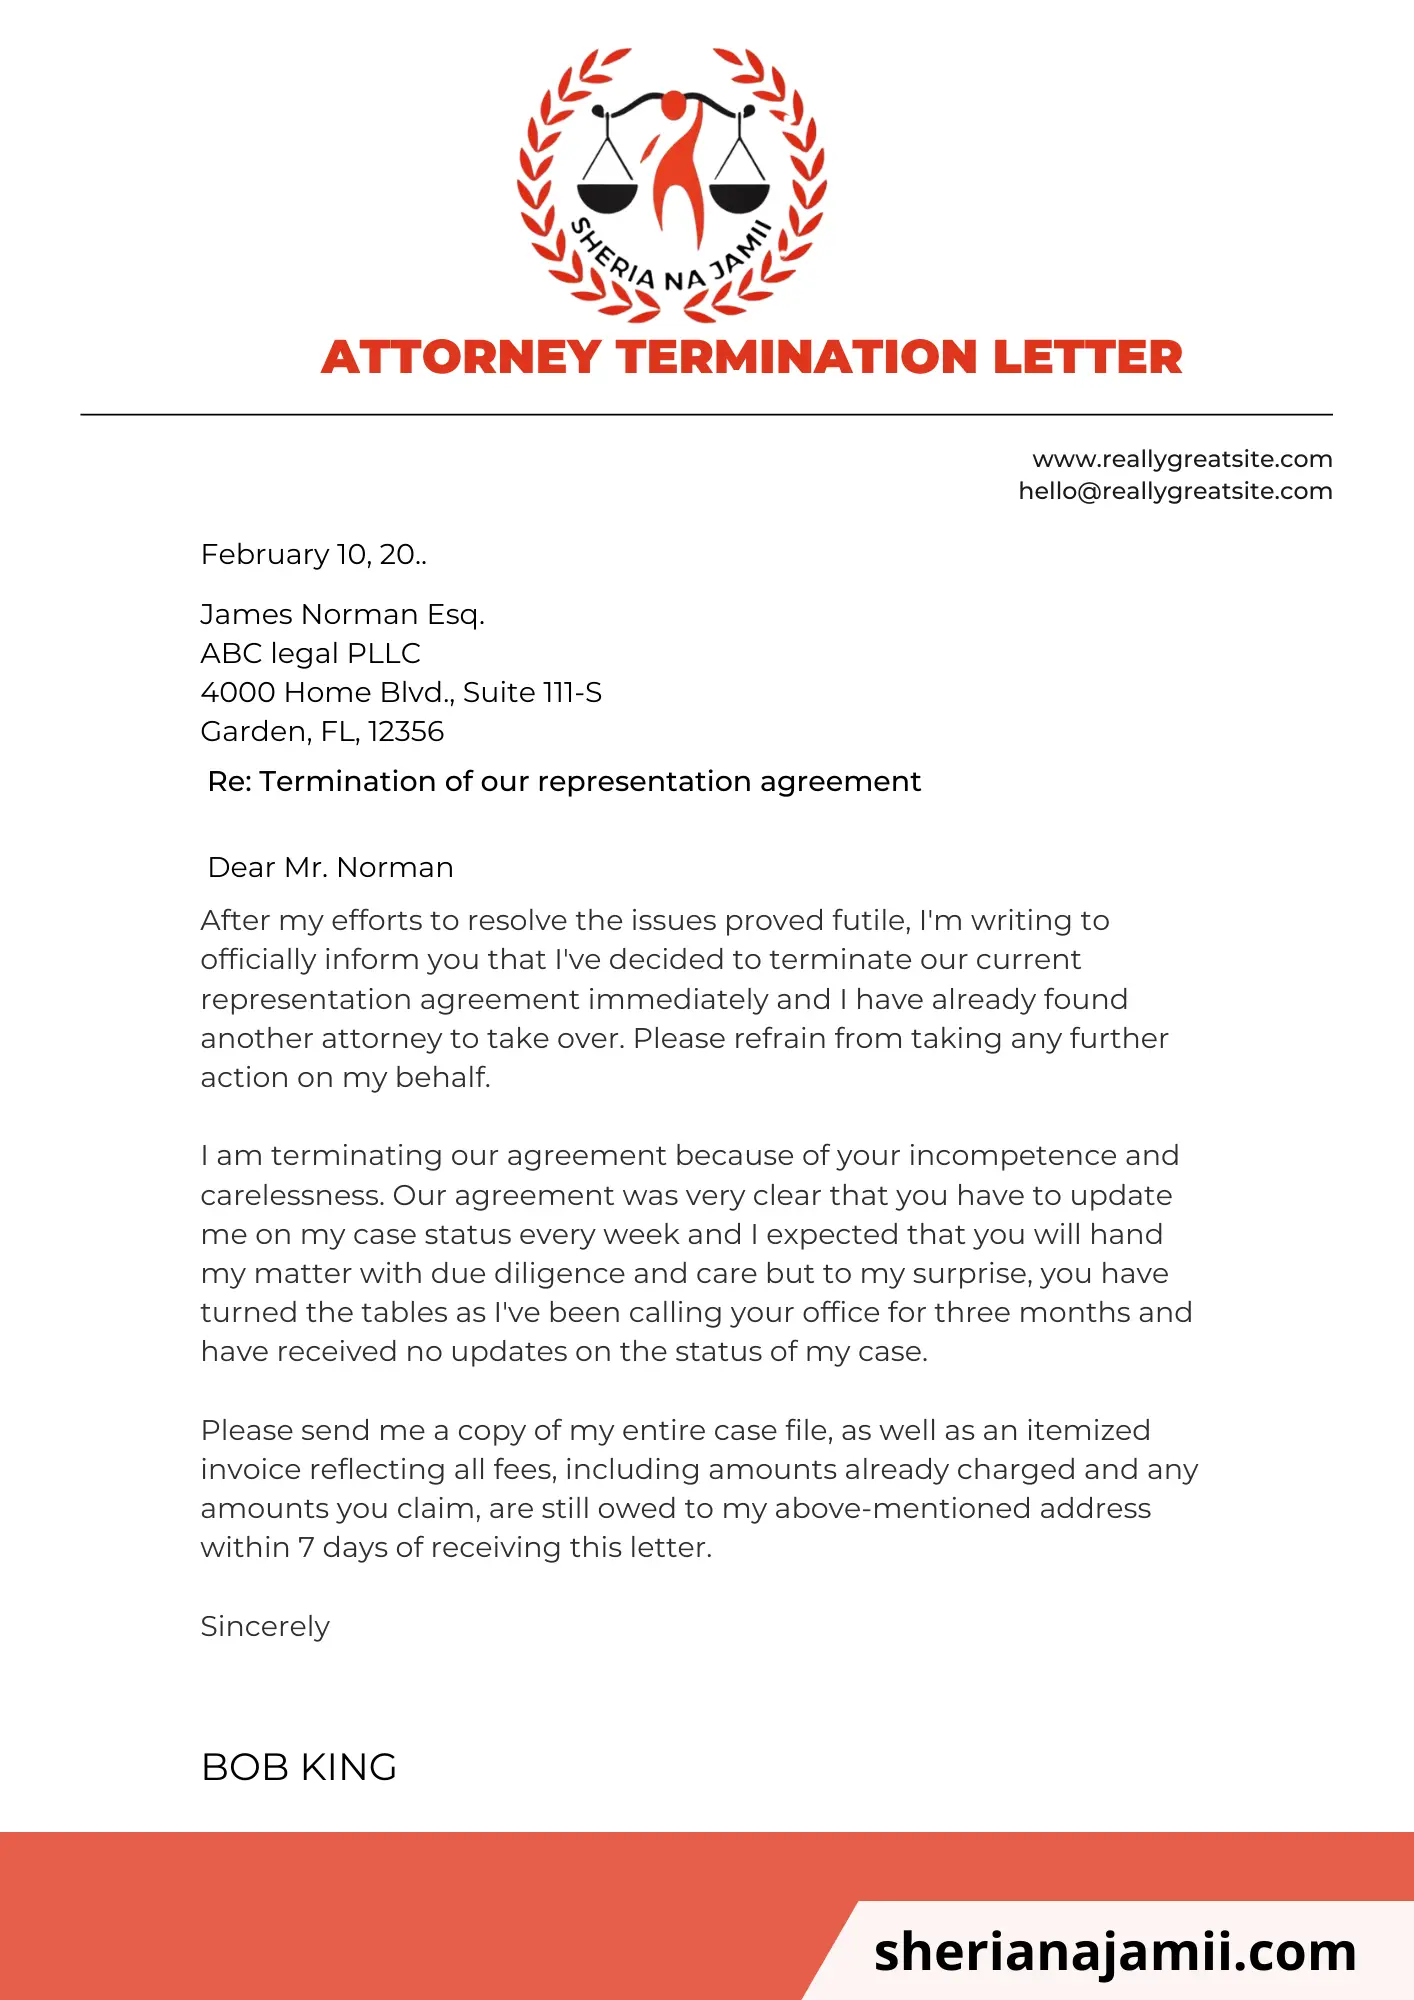 Attorney termination letter, Attorney termination letter sample, sample letter terminating attorney-client relationship, how to fire your attorney letter sample, fire attorney letter